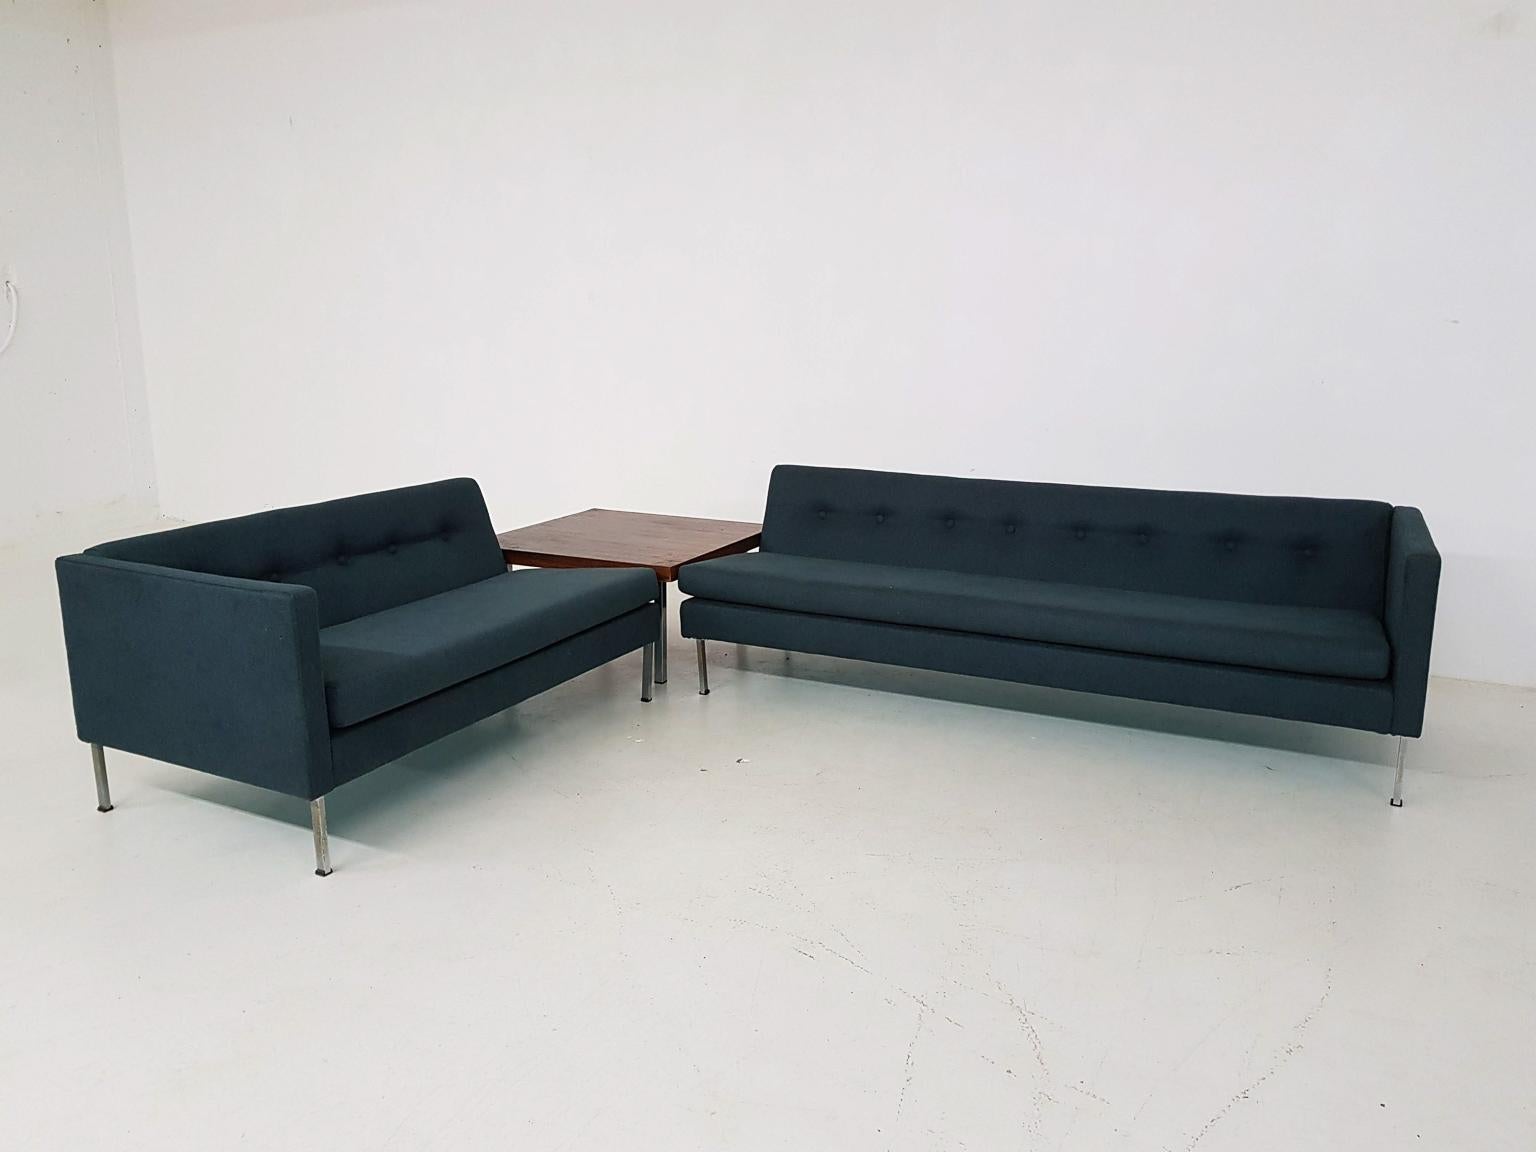 Kho Liang Ie for Artifort model 680-686 sofa with corner or coffee table, the Netherlands 1960s.

A two-seat and a three-seat in new dark green upholstery on metal feet. Comes with a corner table in teak, which could also be used as a coffee table.